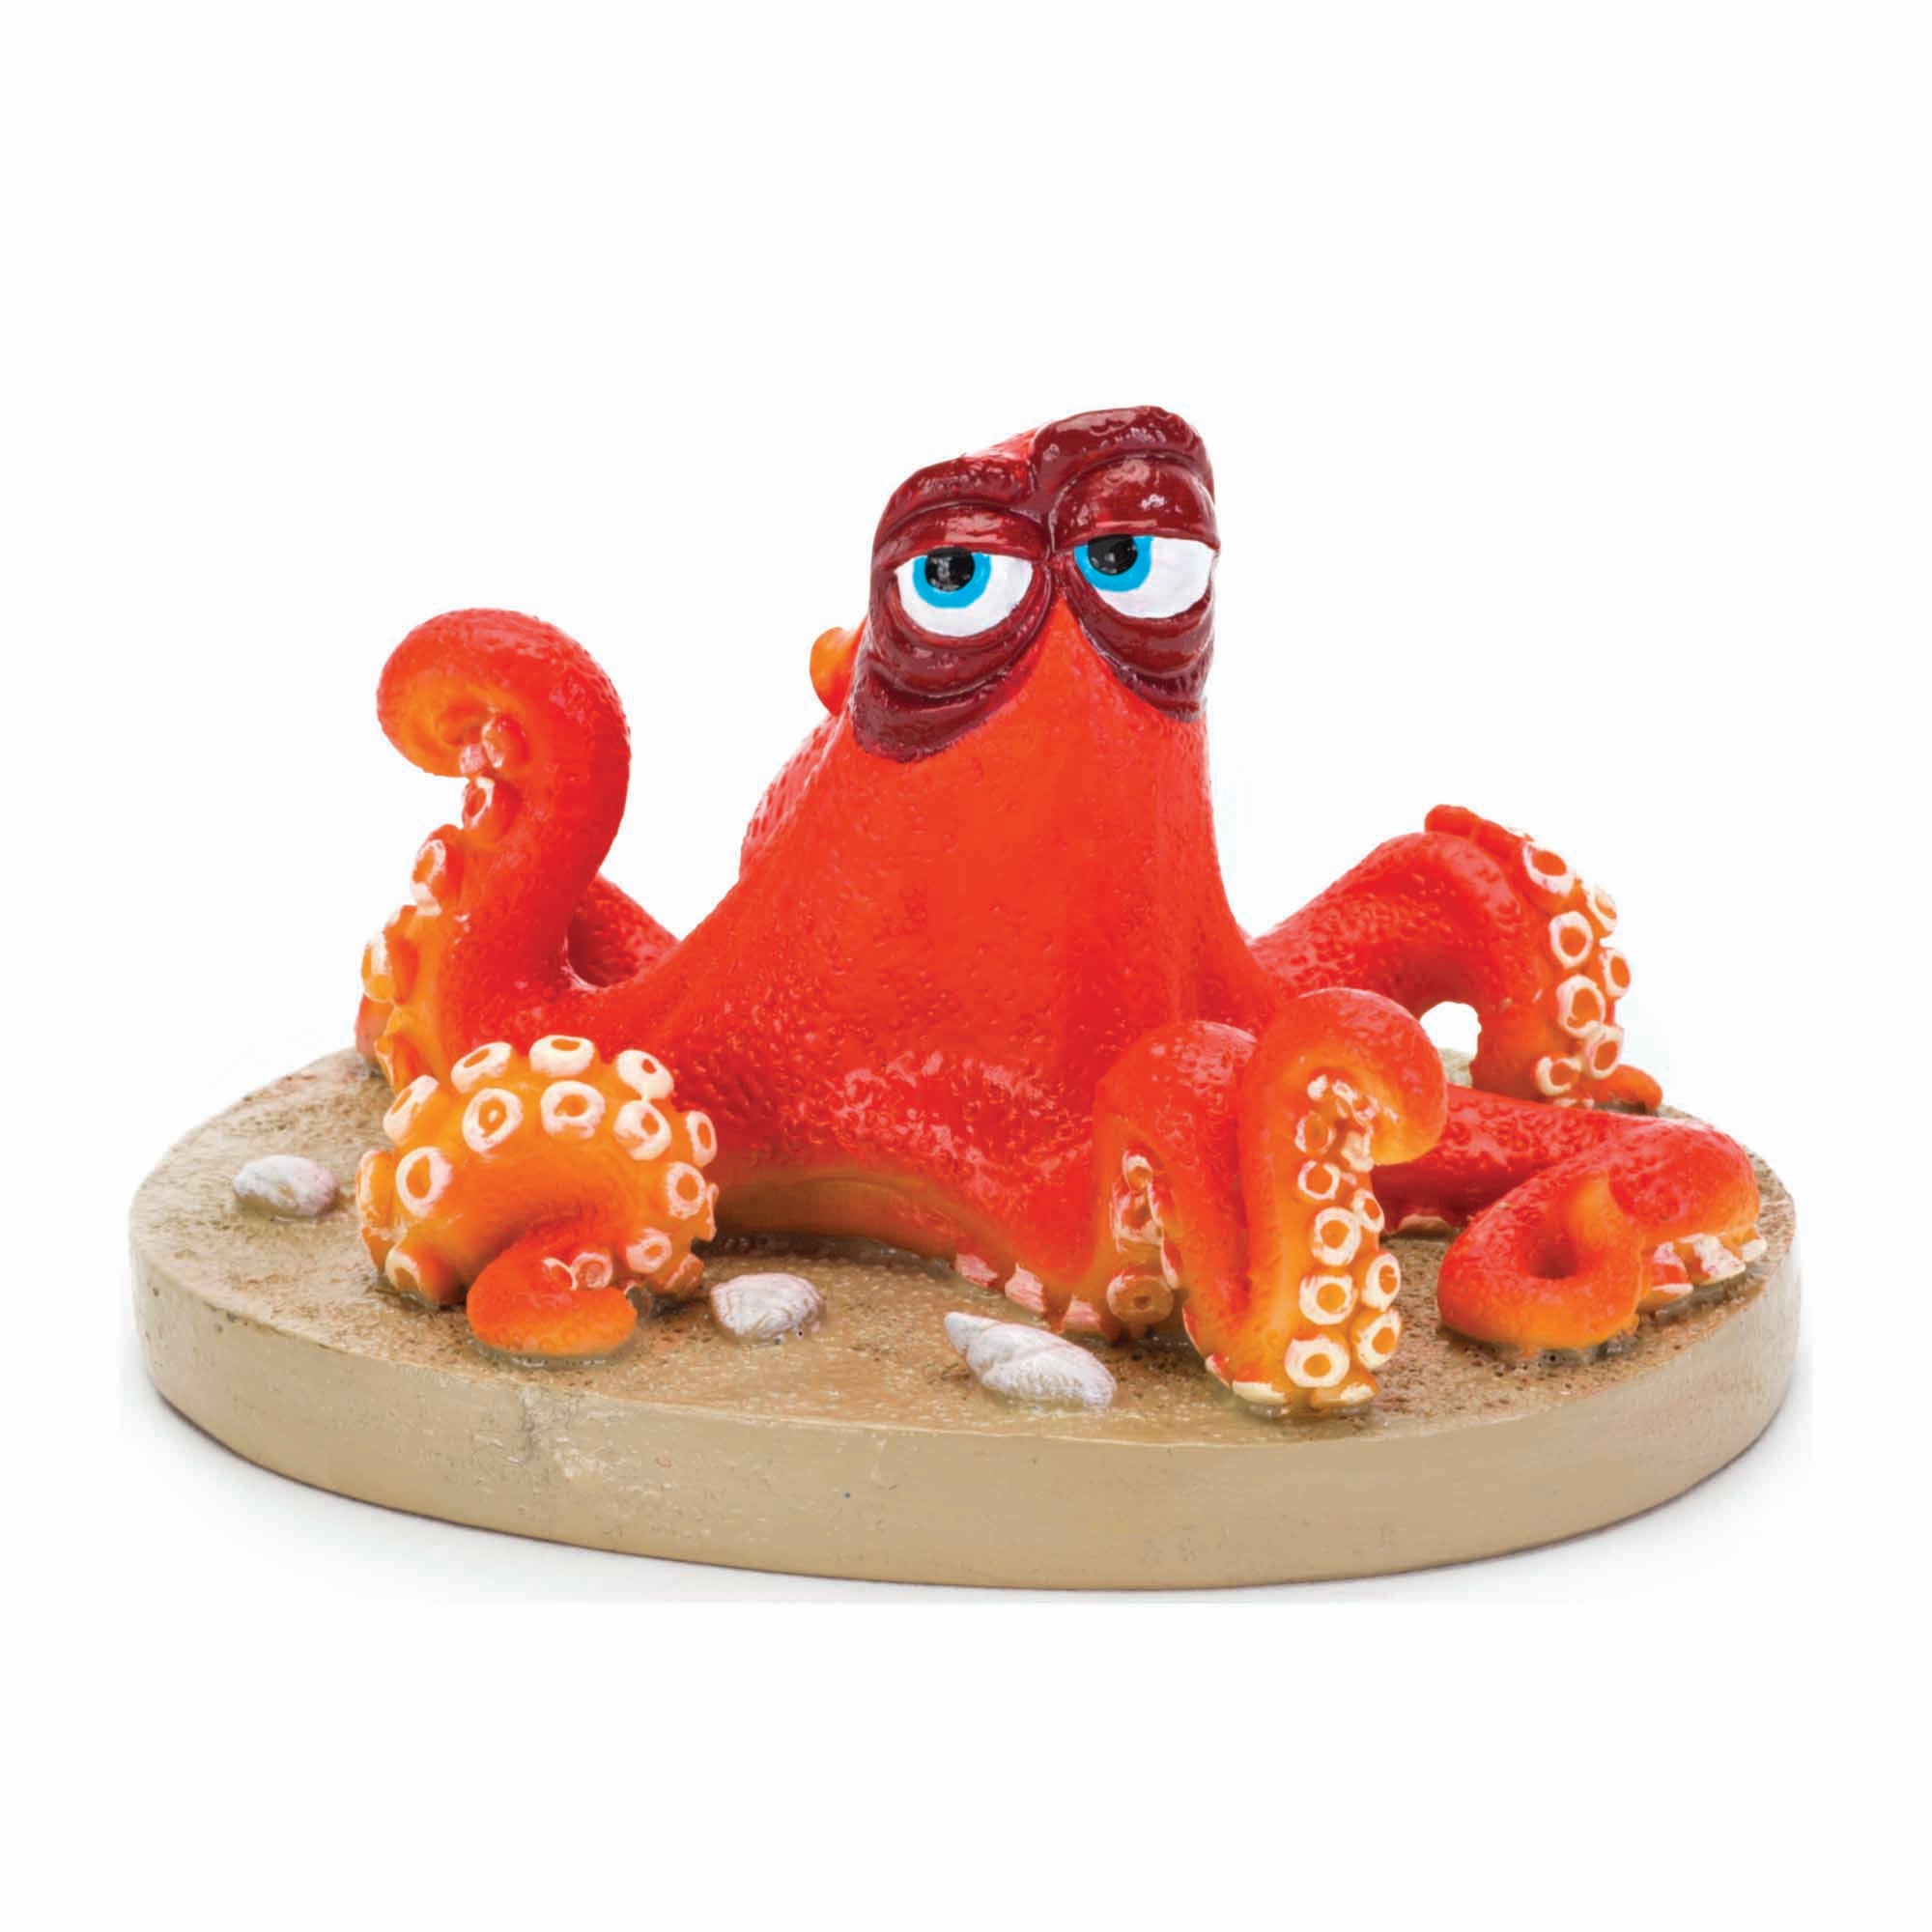 Penn-Plax Officially Licensed Disney's Finding Nemo Fish Tank and